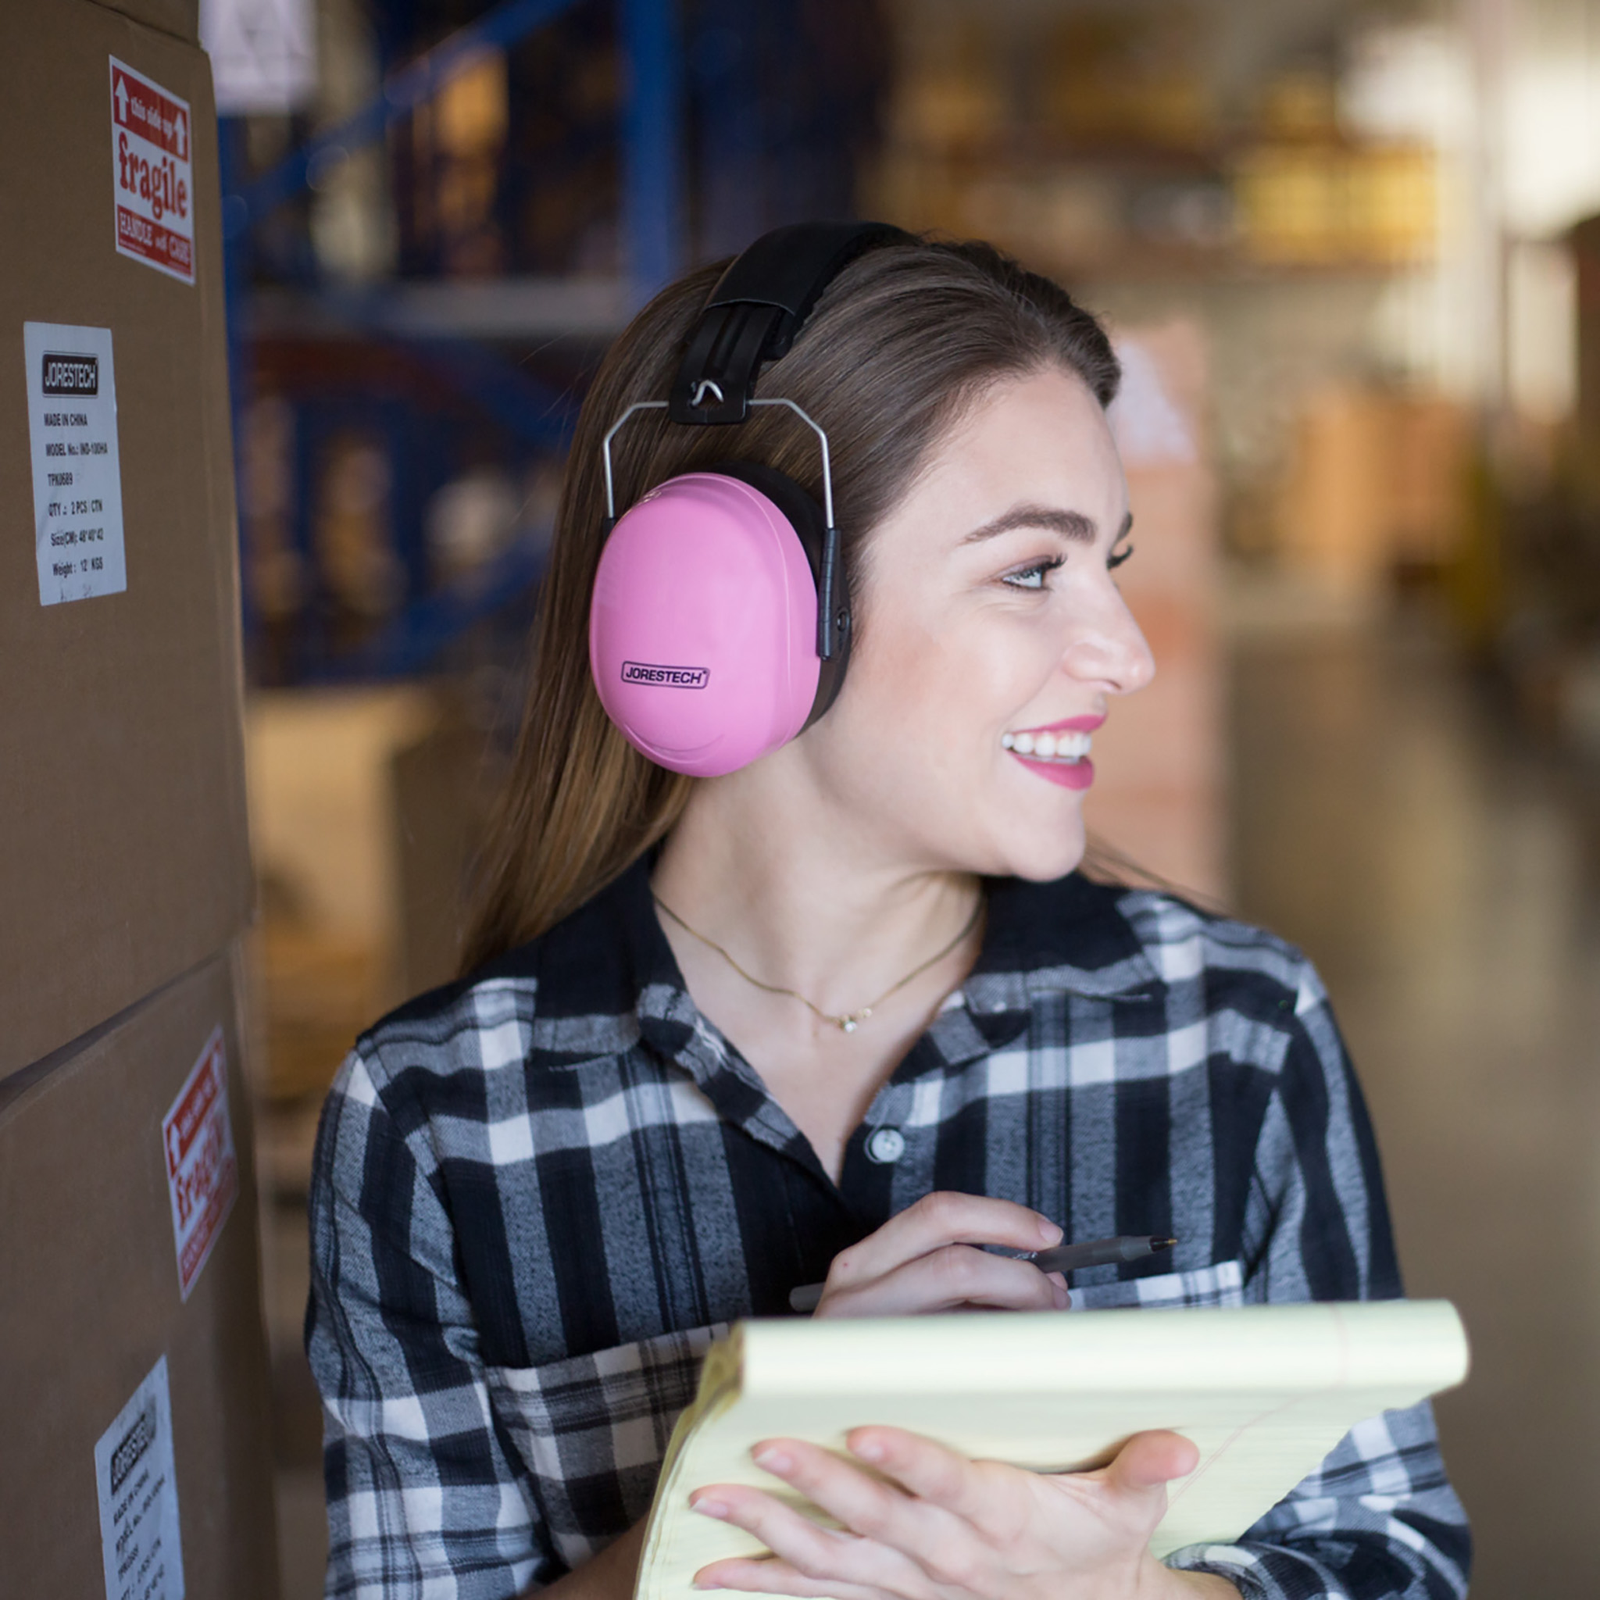 Women wearing the JORESTECH pink earmuffs while working keeping inventory of many boxes